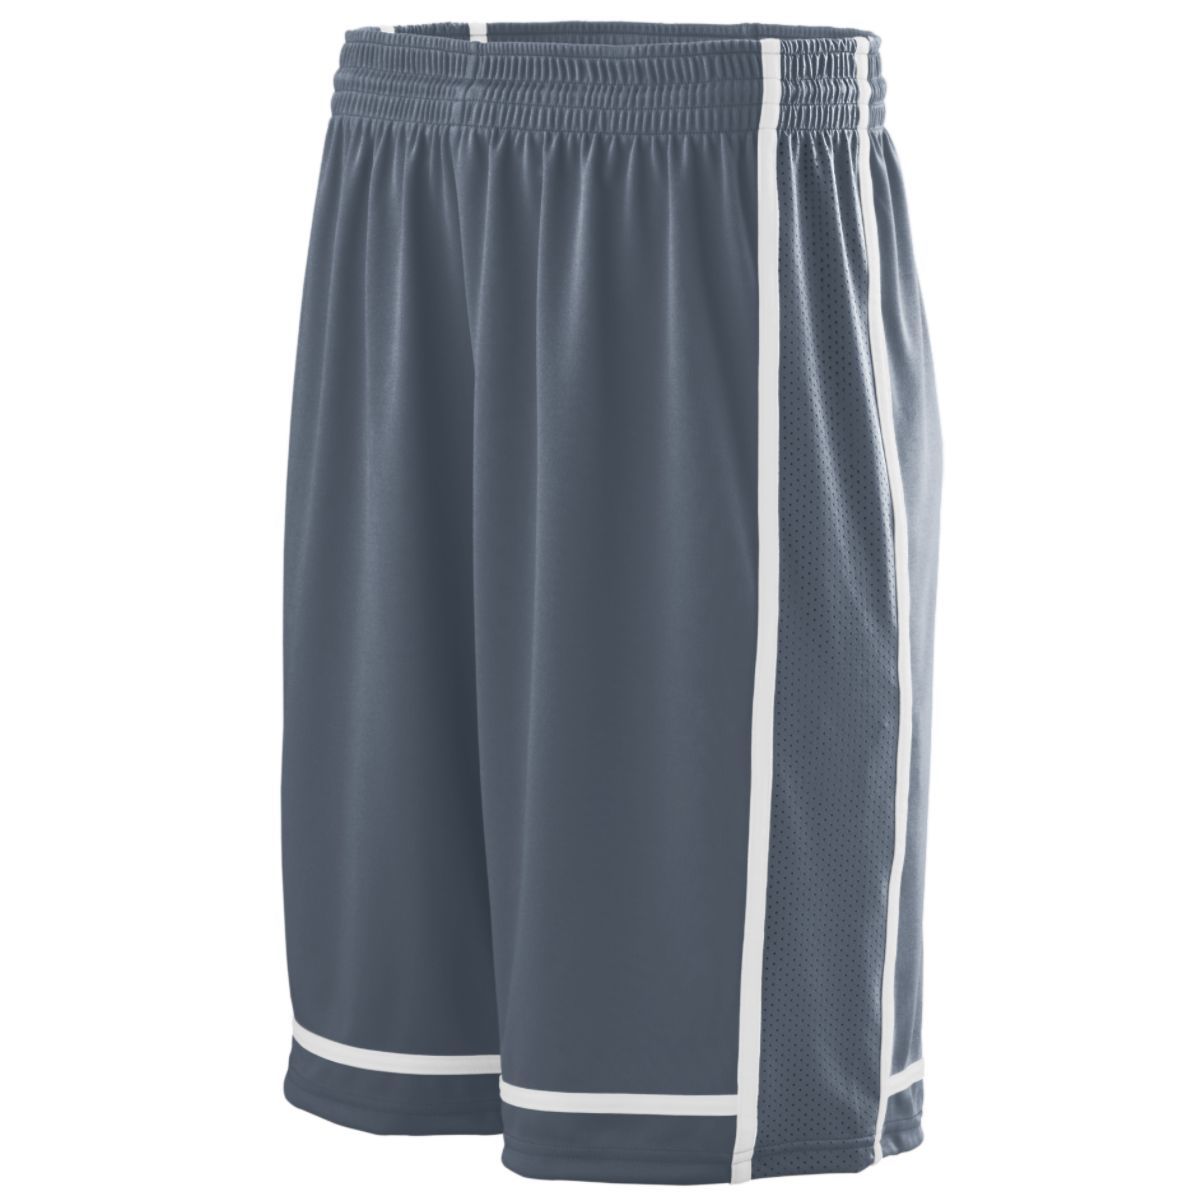 Augusta Sportswear Winning Streak Shorts in Graphite/White  -Part of the Adult, Adult-Shorts, Augusta-Products, Basketball, All-Sports, All-Sports-1 product lines at KanaleyCreations.com